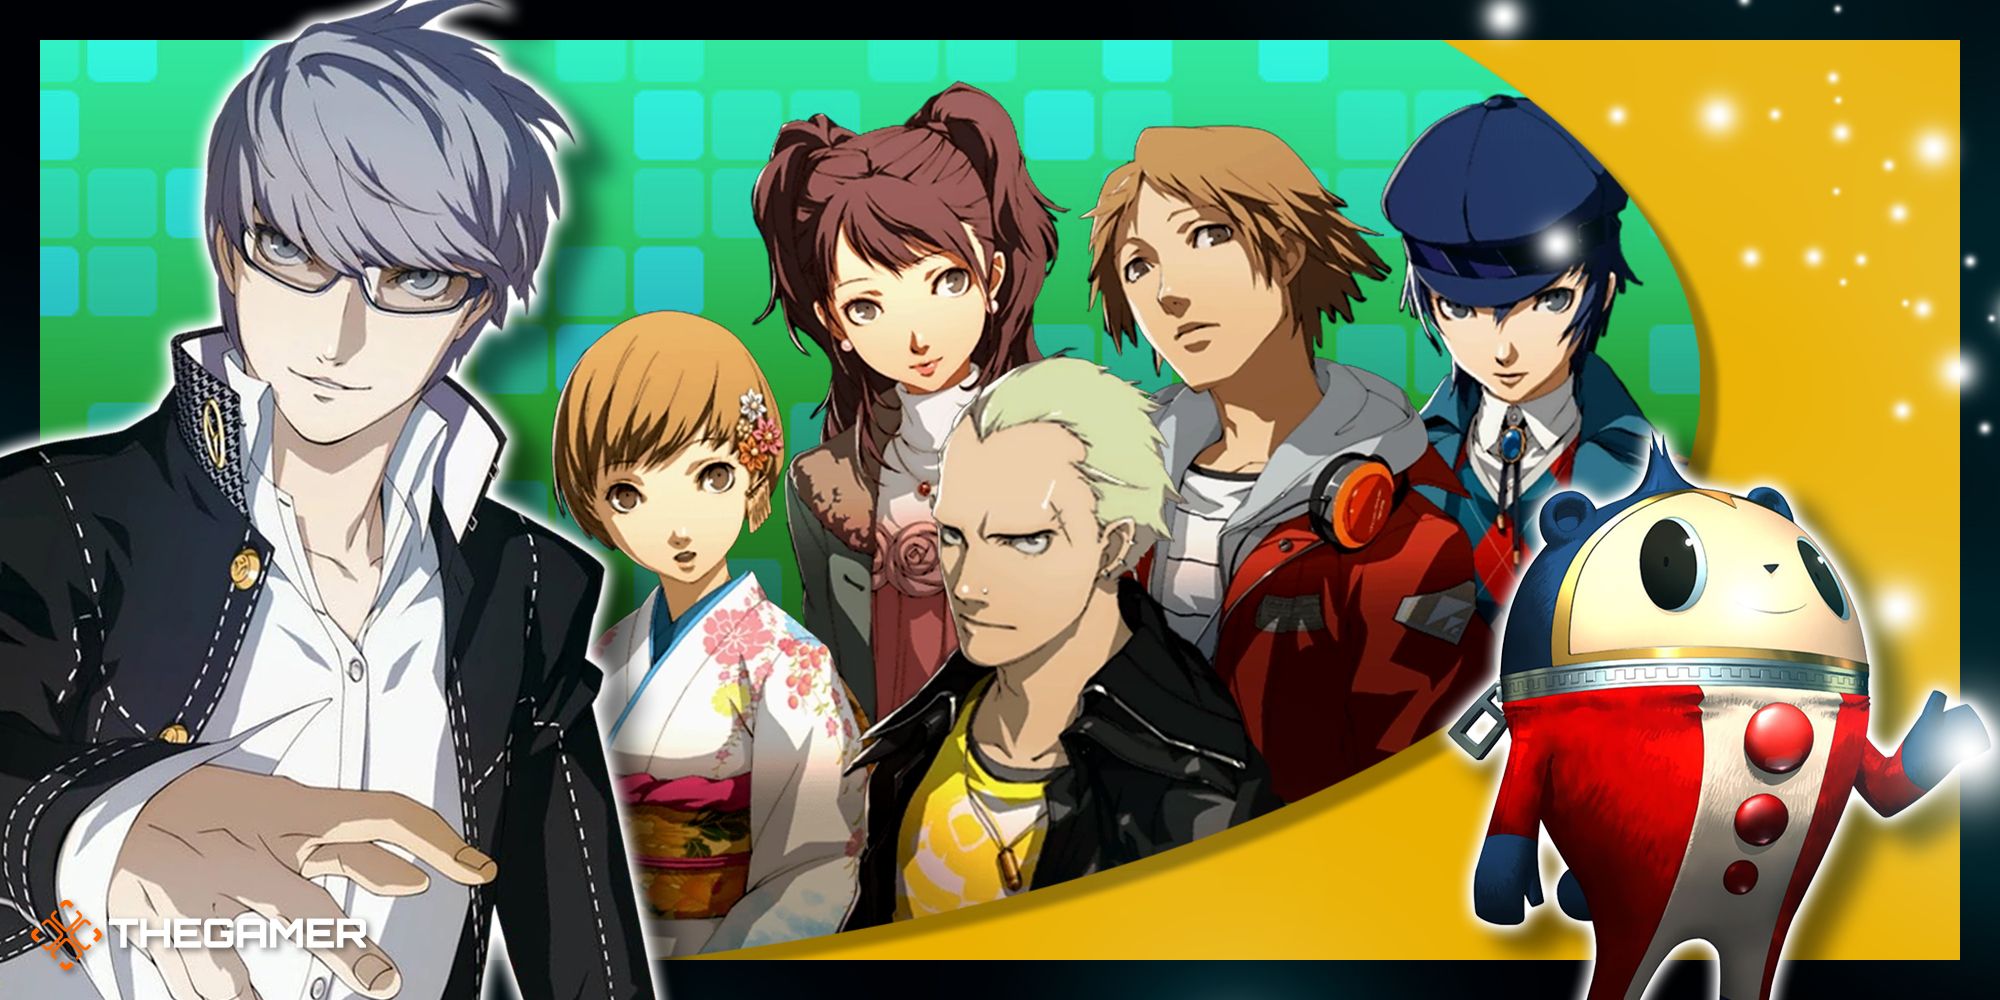 6Persona 4 Golden A collage of Yu, the Seekers Of Truth, and Teddie.